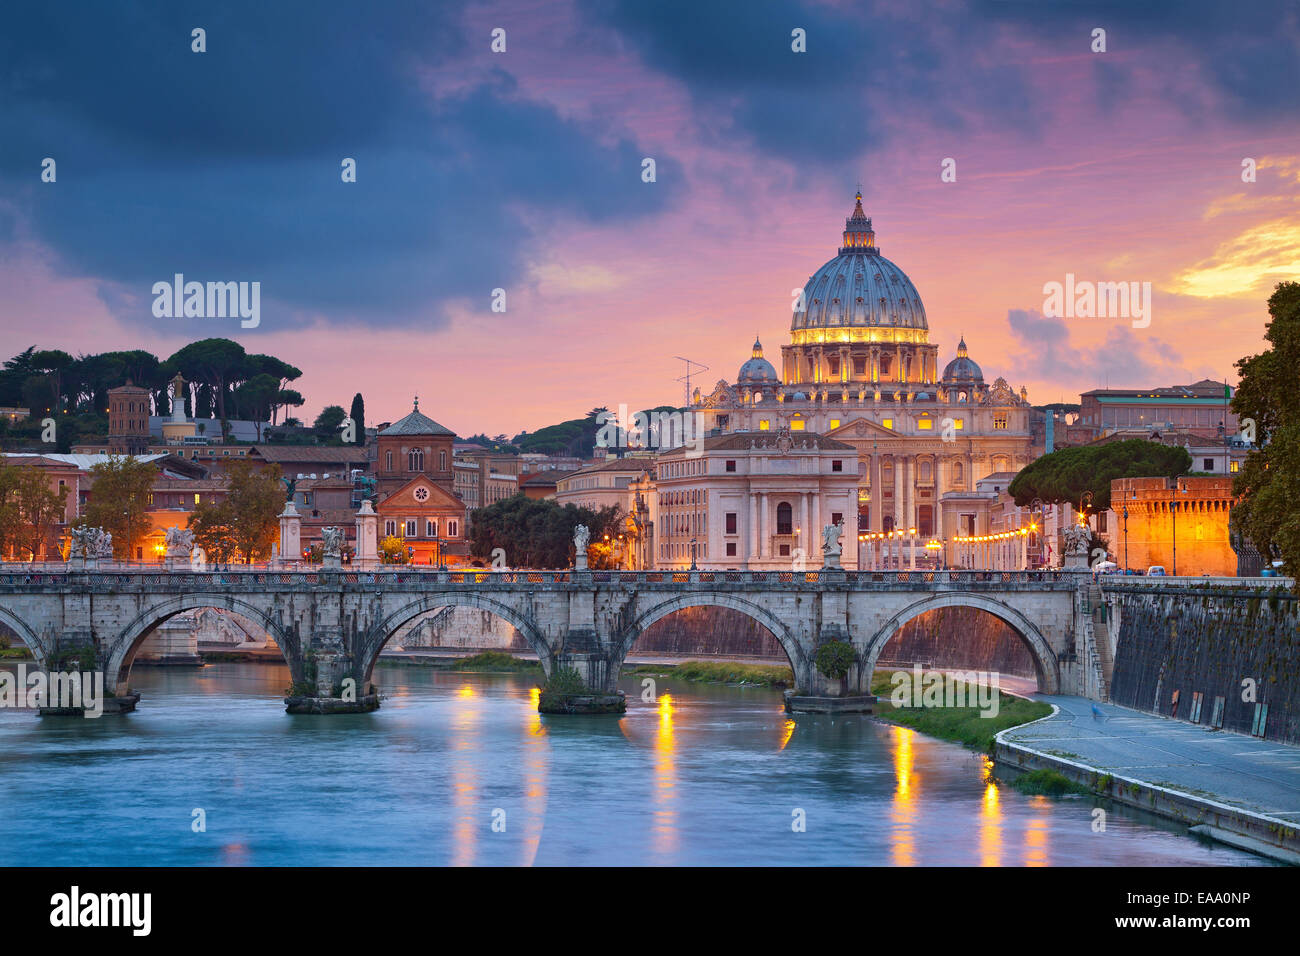 View of St. Peter's cathedral in Rome, Italy during beautiful sunset. Stock Photo